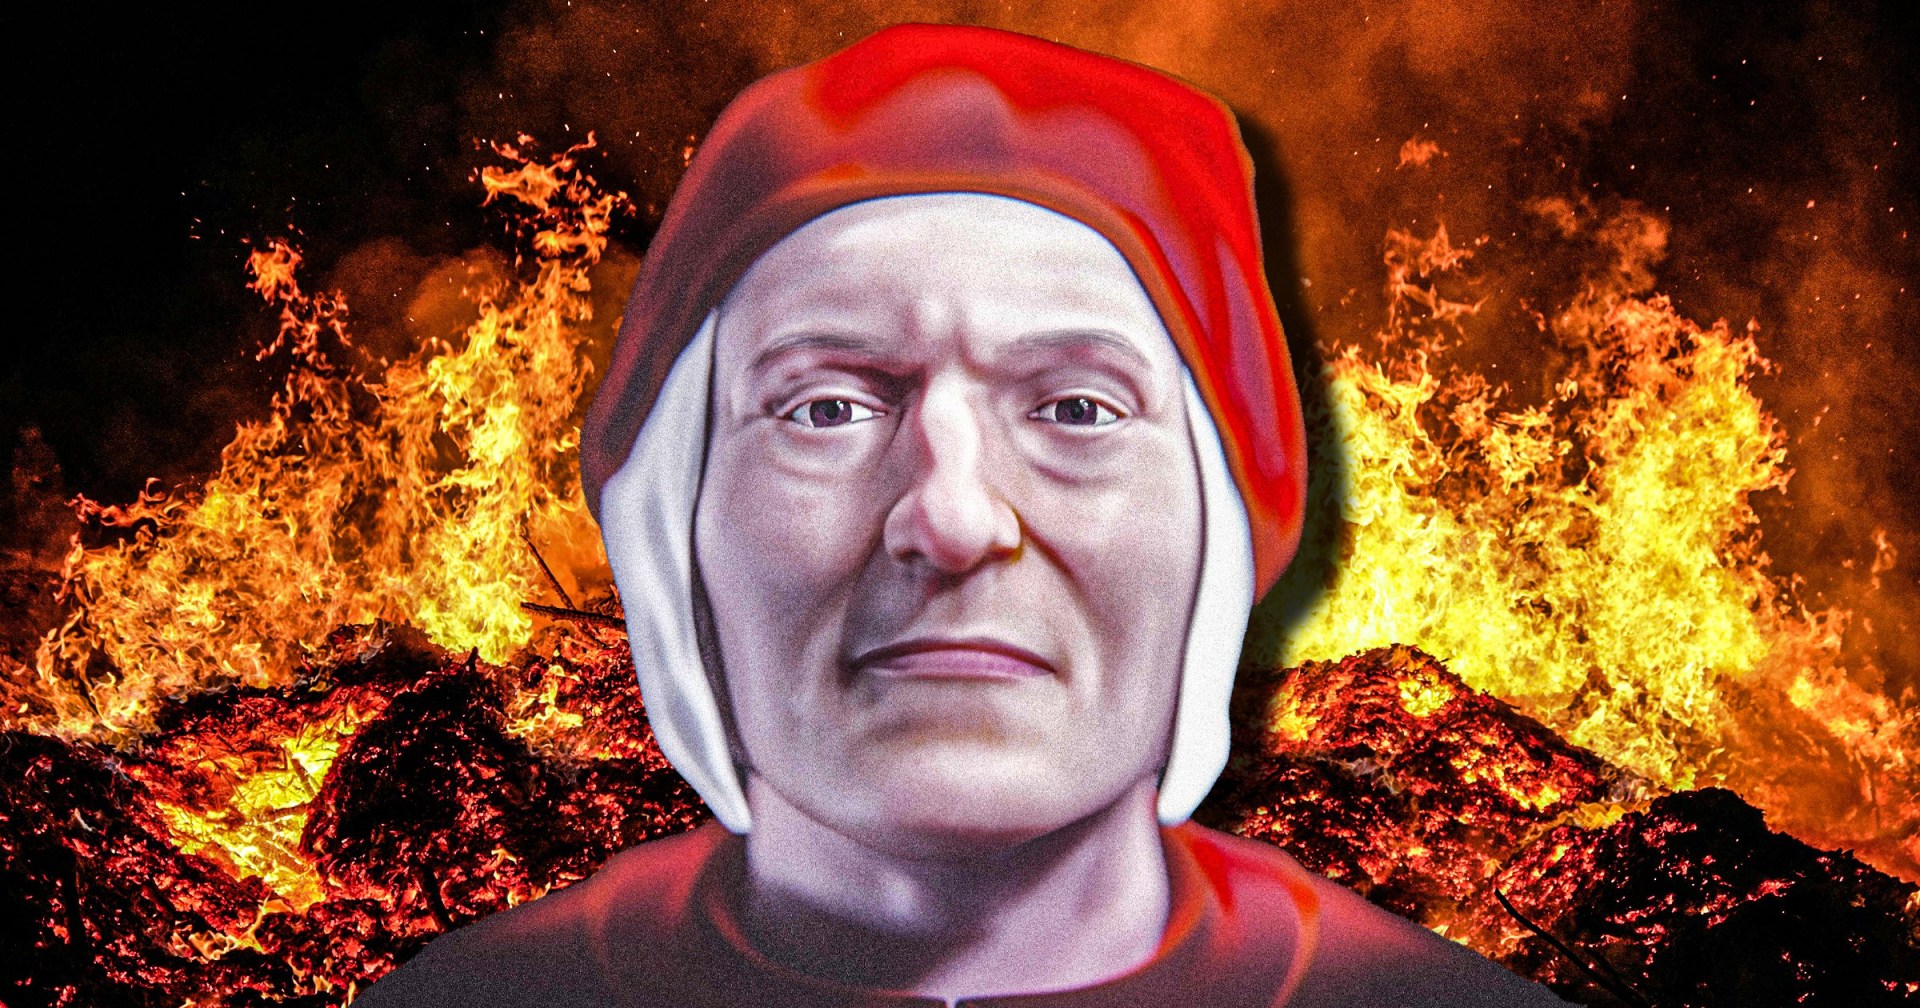 face of man who created hell has been revealed after 700 years